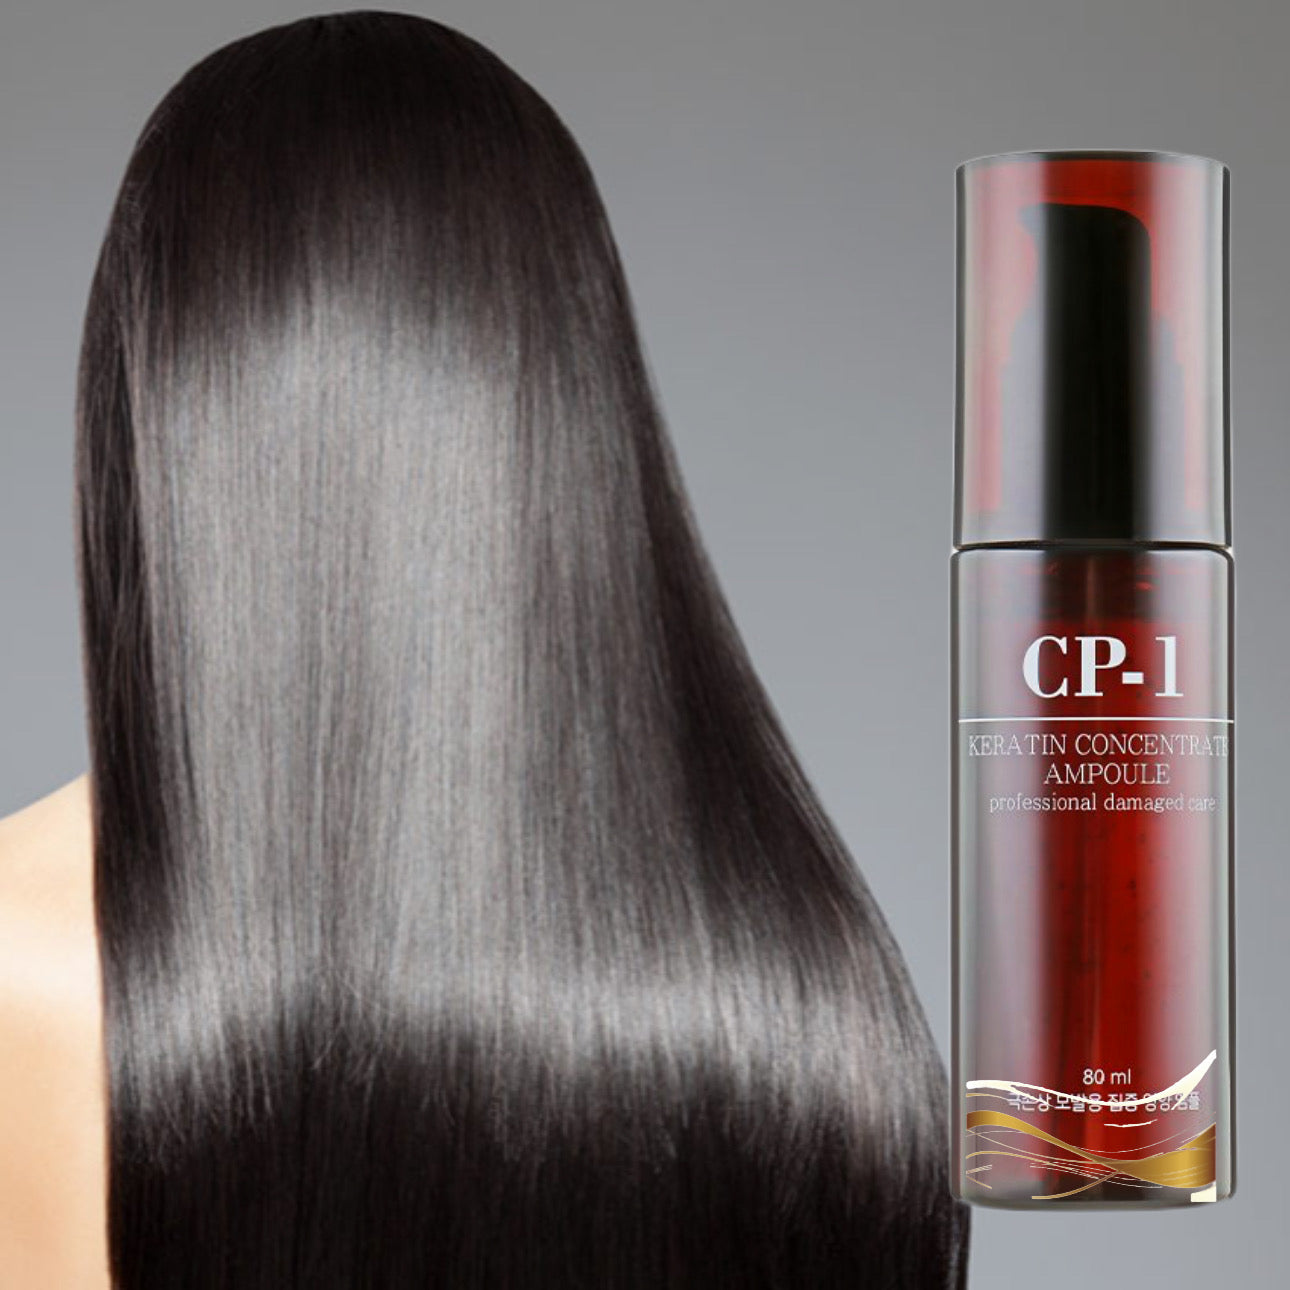 Keratin concentrated hair essence by CP-1